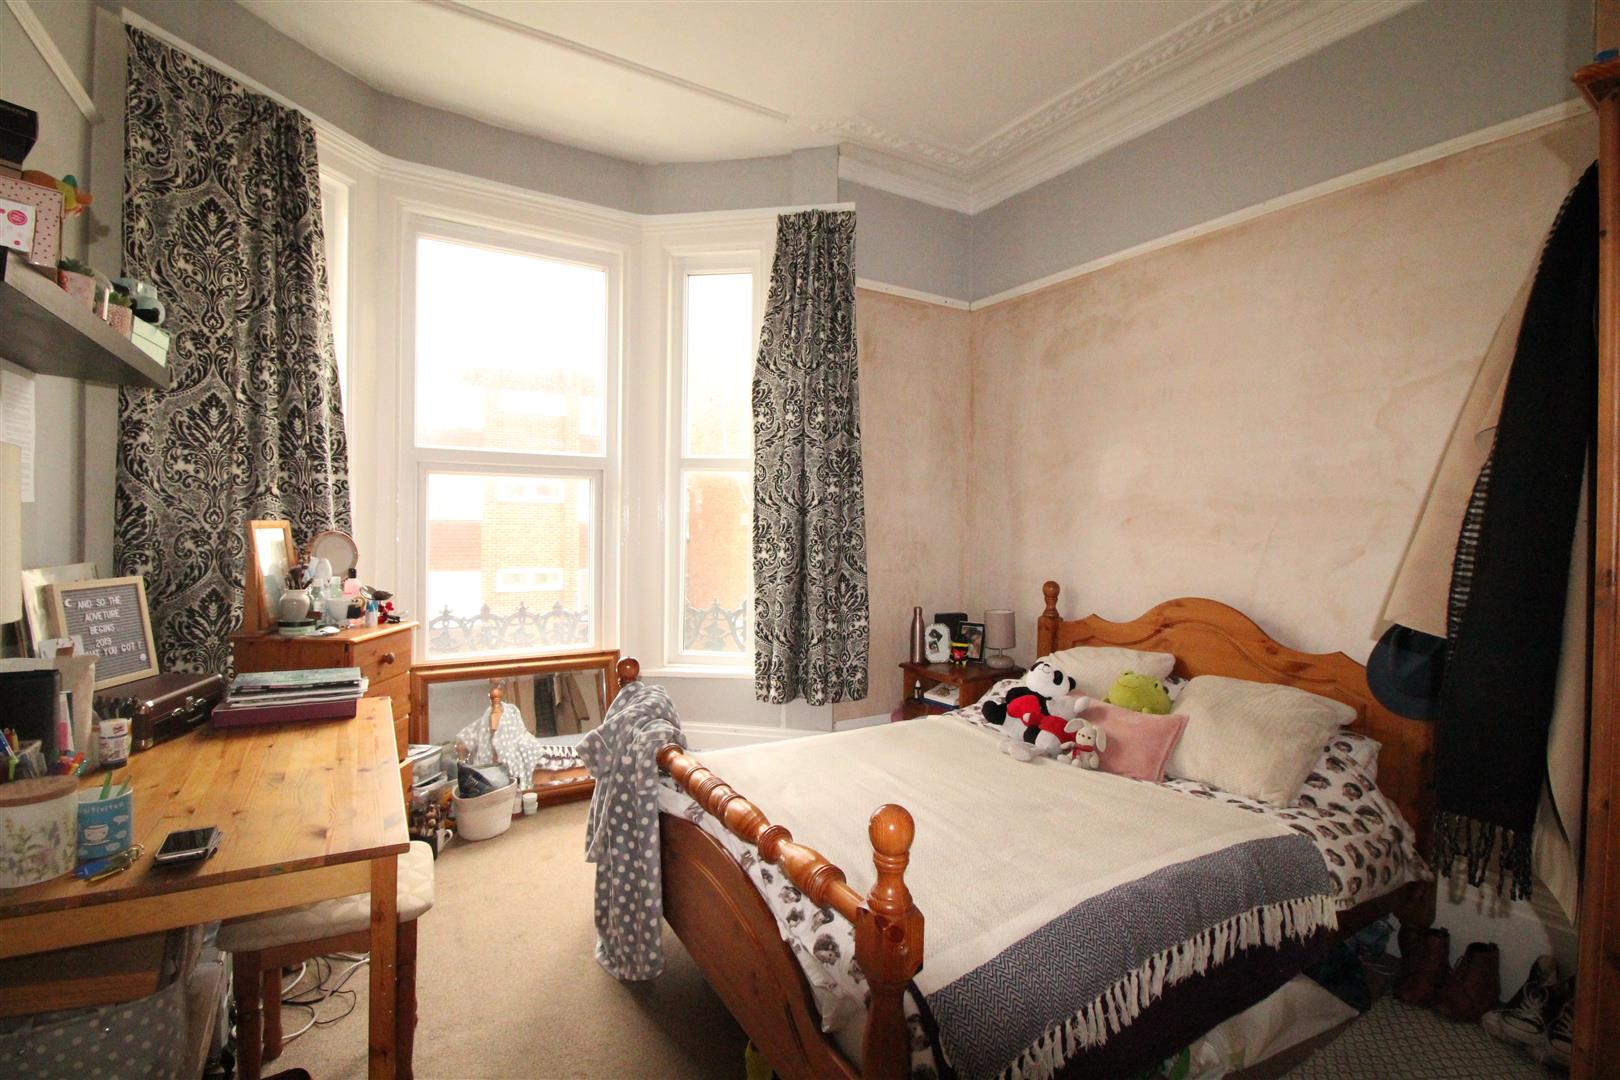 flat for rent nightingale road